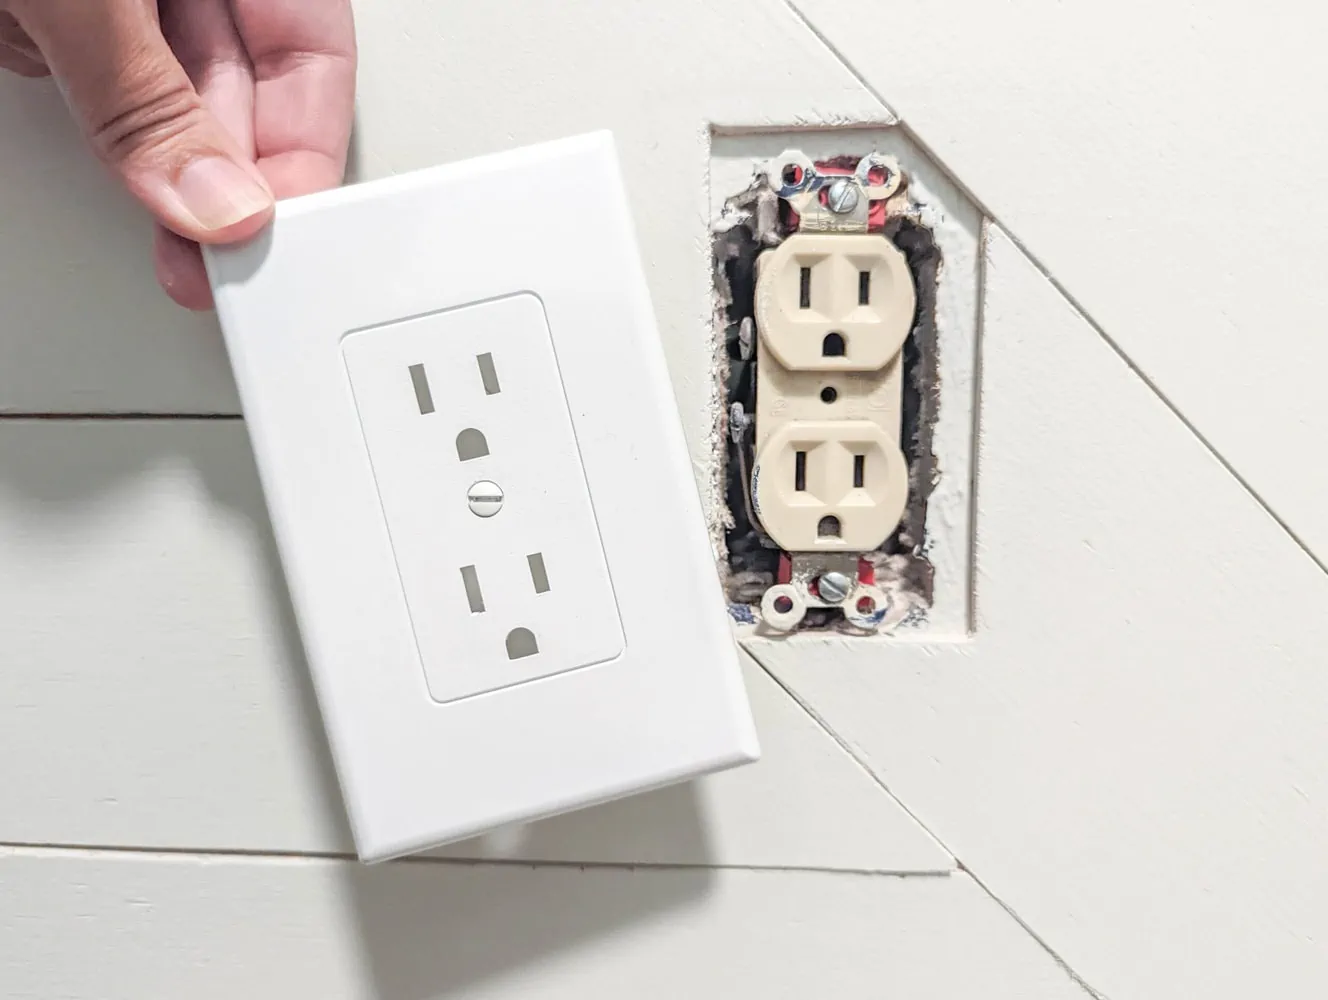 Woman replacing an outlet cover